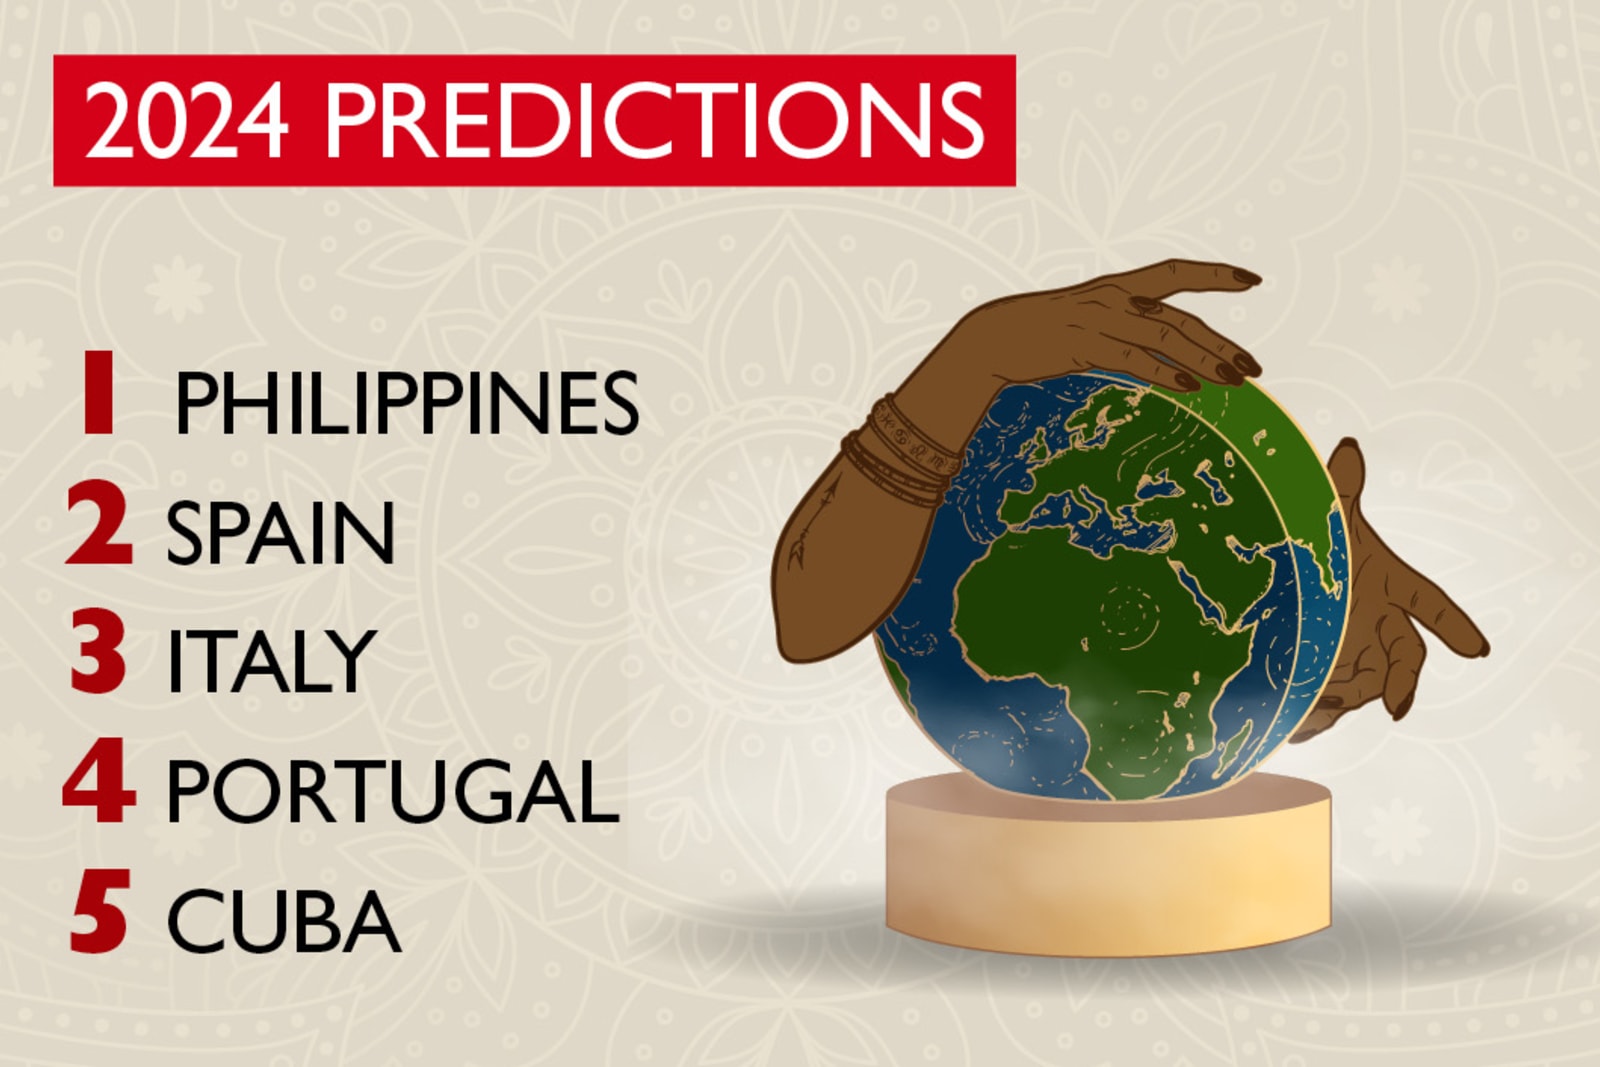 We have a hunch Philippines, Spain, Italy, Portugal and Cuba are going to be popular destinations in 2024 